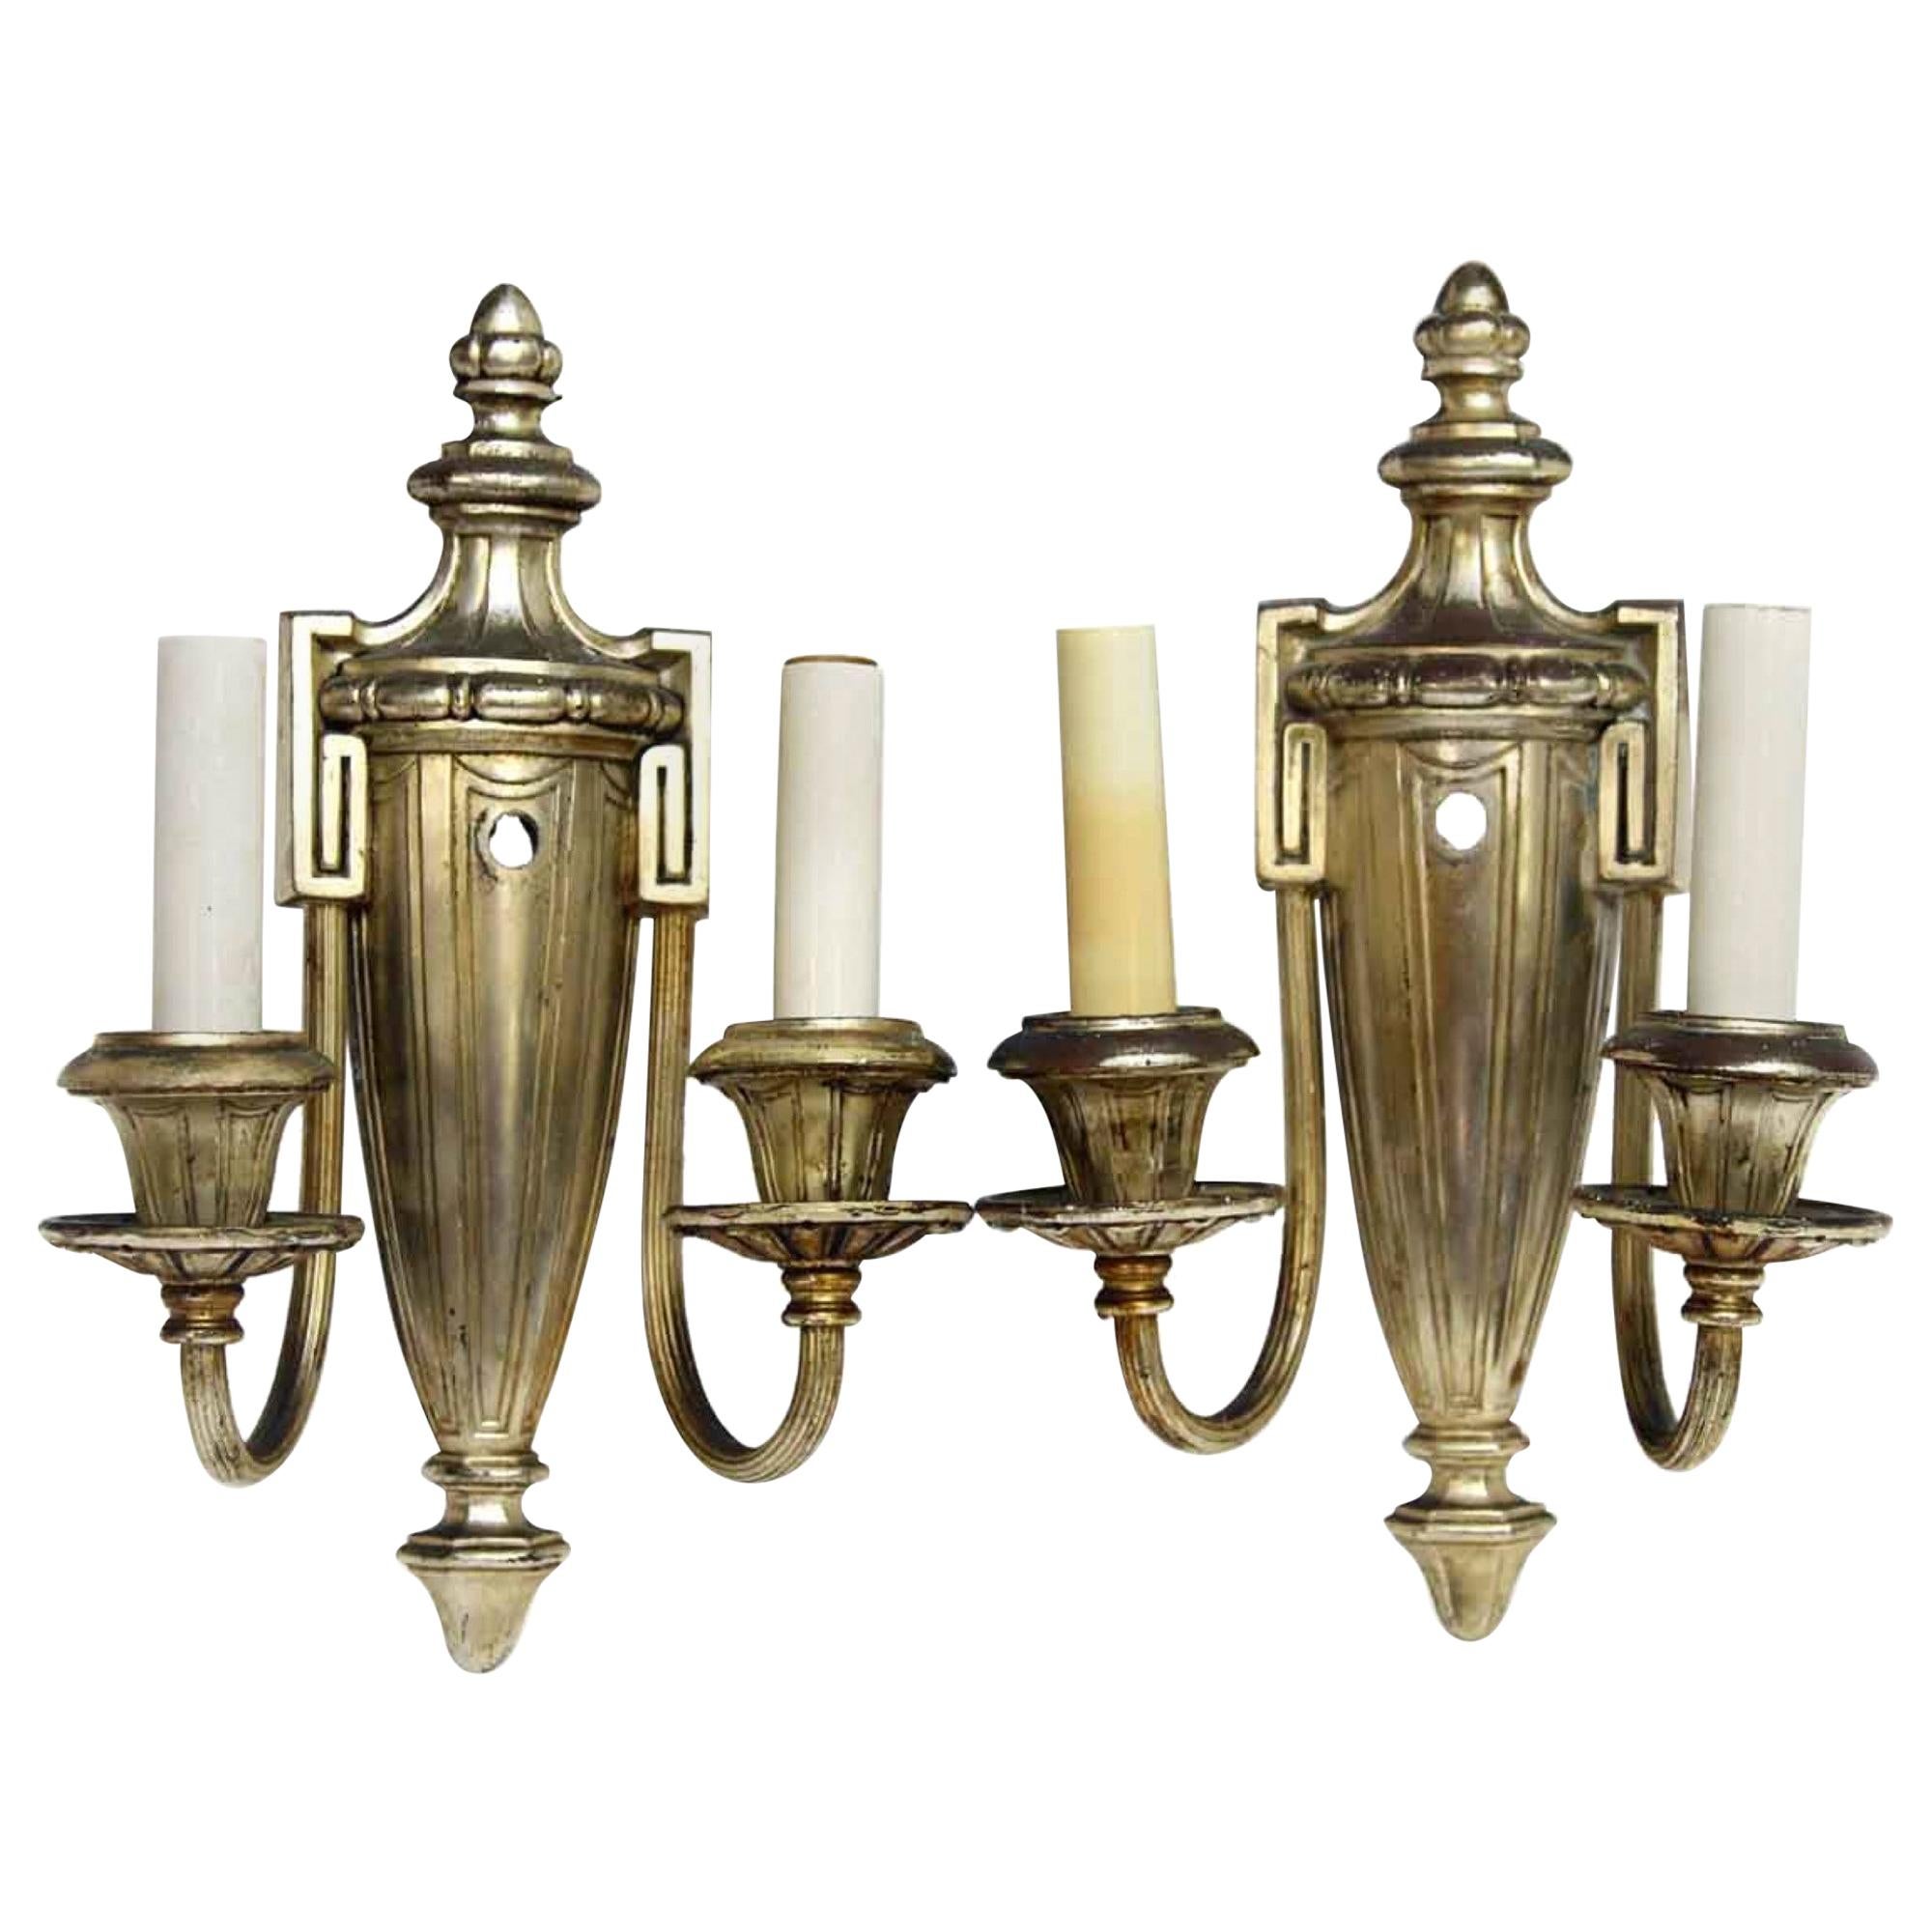 1920s Pair of Neoclassical Silvered Brass Sconces with Greek Urn and Key Detail